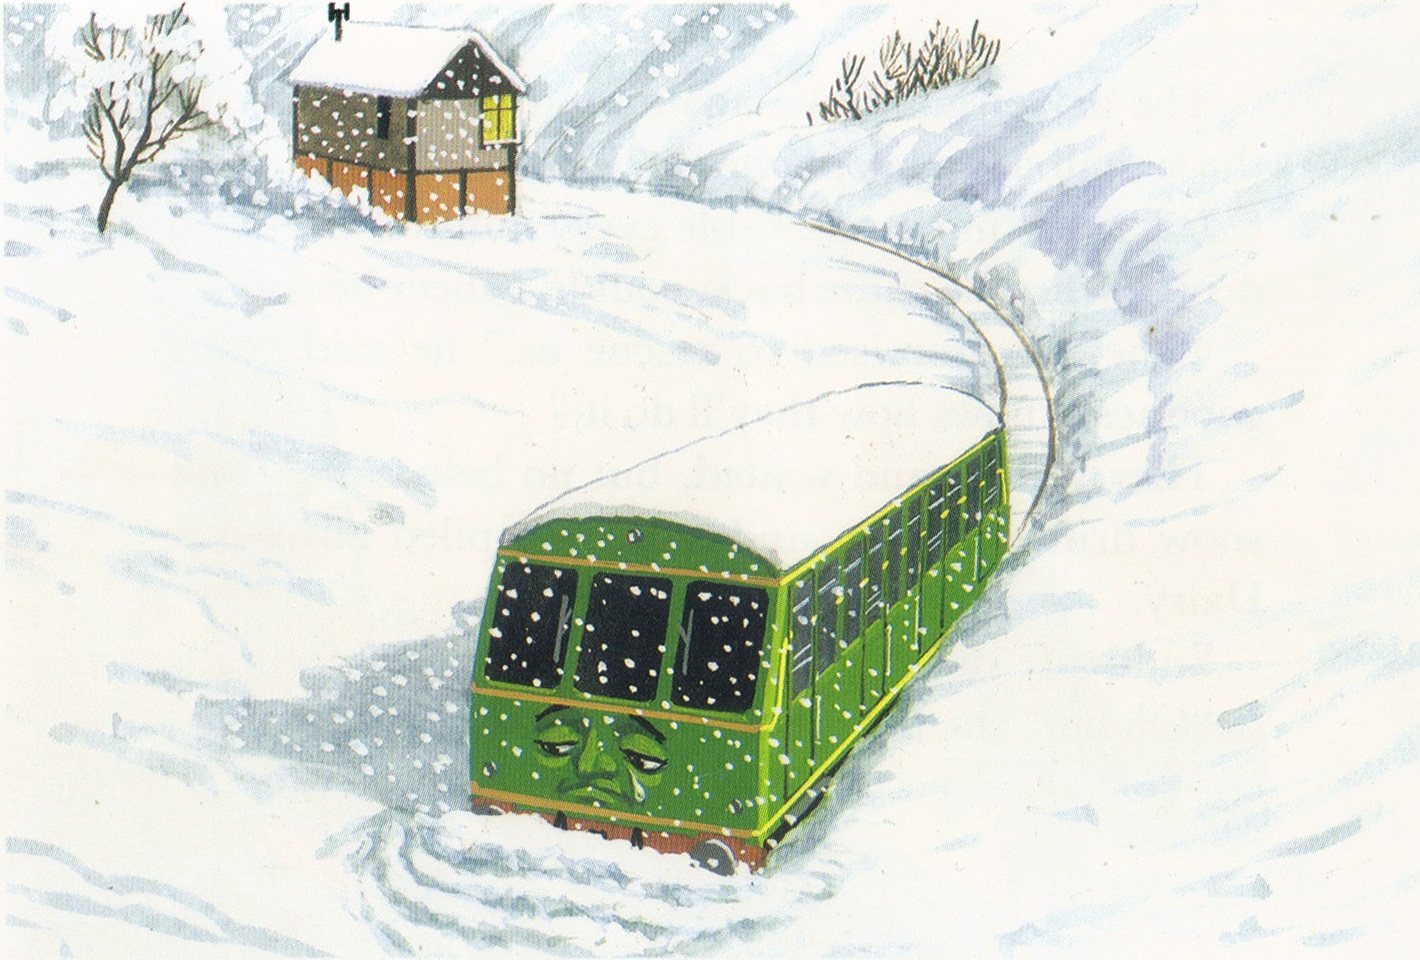 https://static.wikia.nocookie.net/thomas-and-friends-encyclopedia/images/1/1a/SnowProblem5.jpg/revision/latest?cb=20200201104018